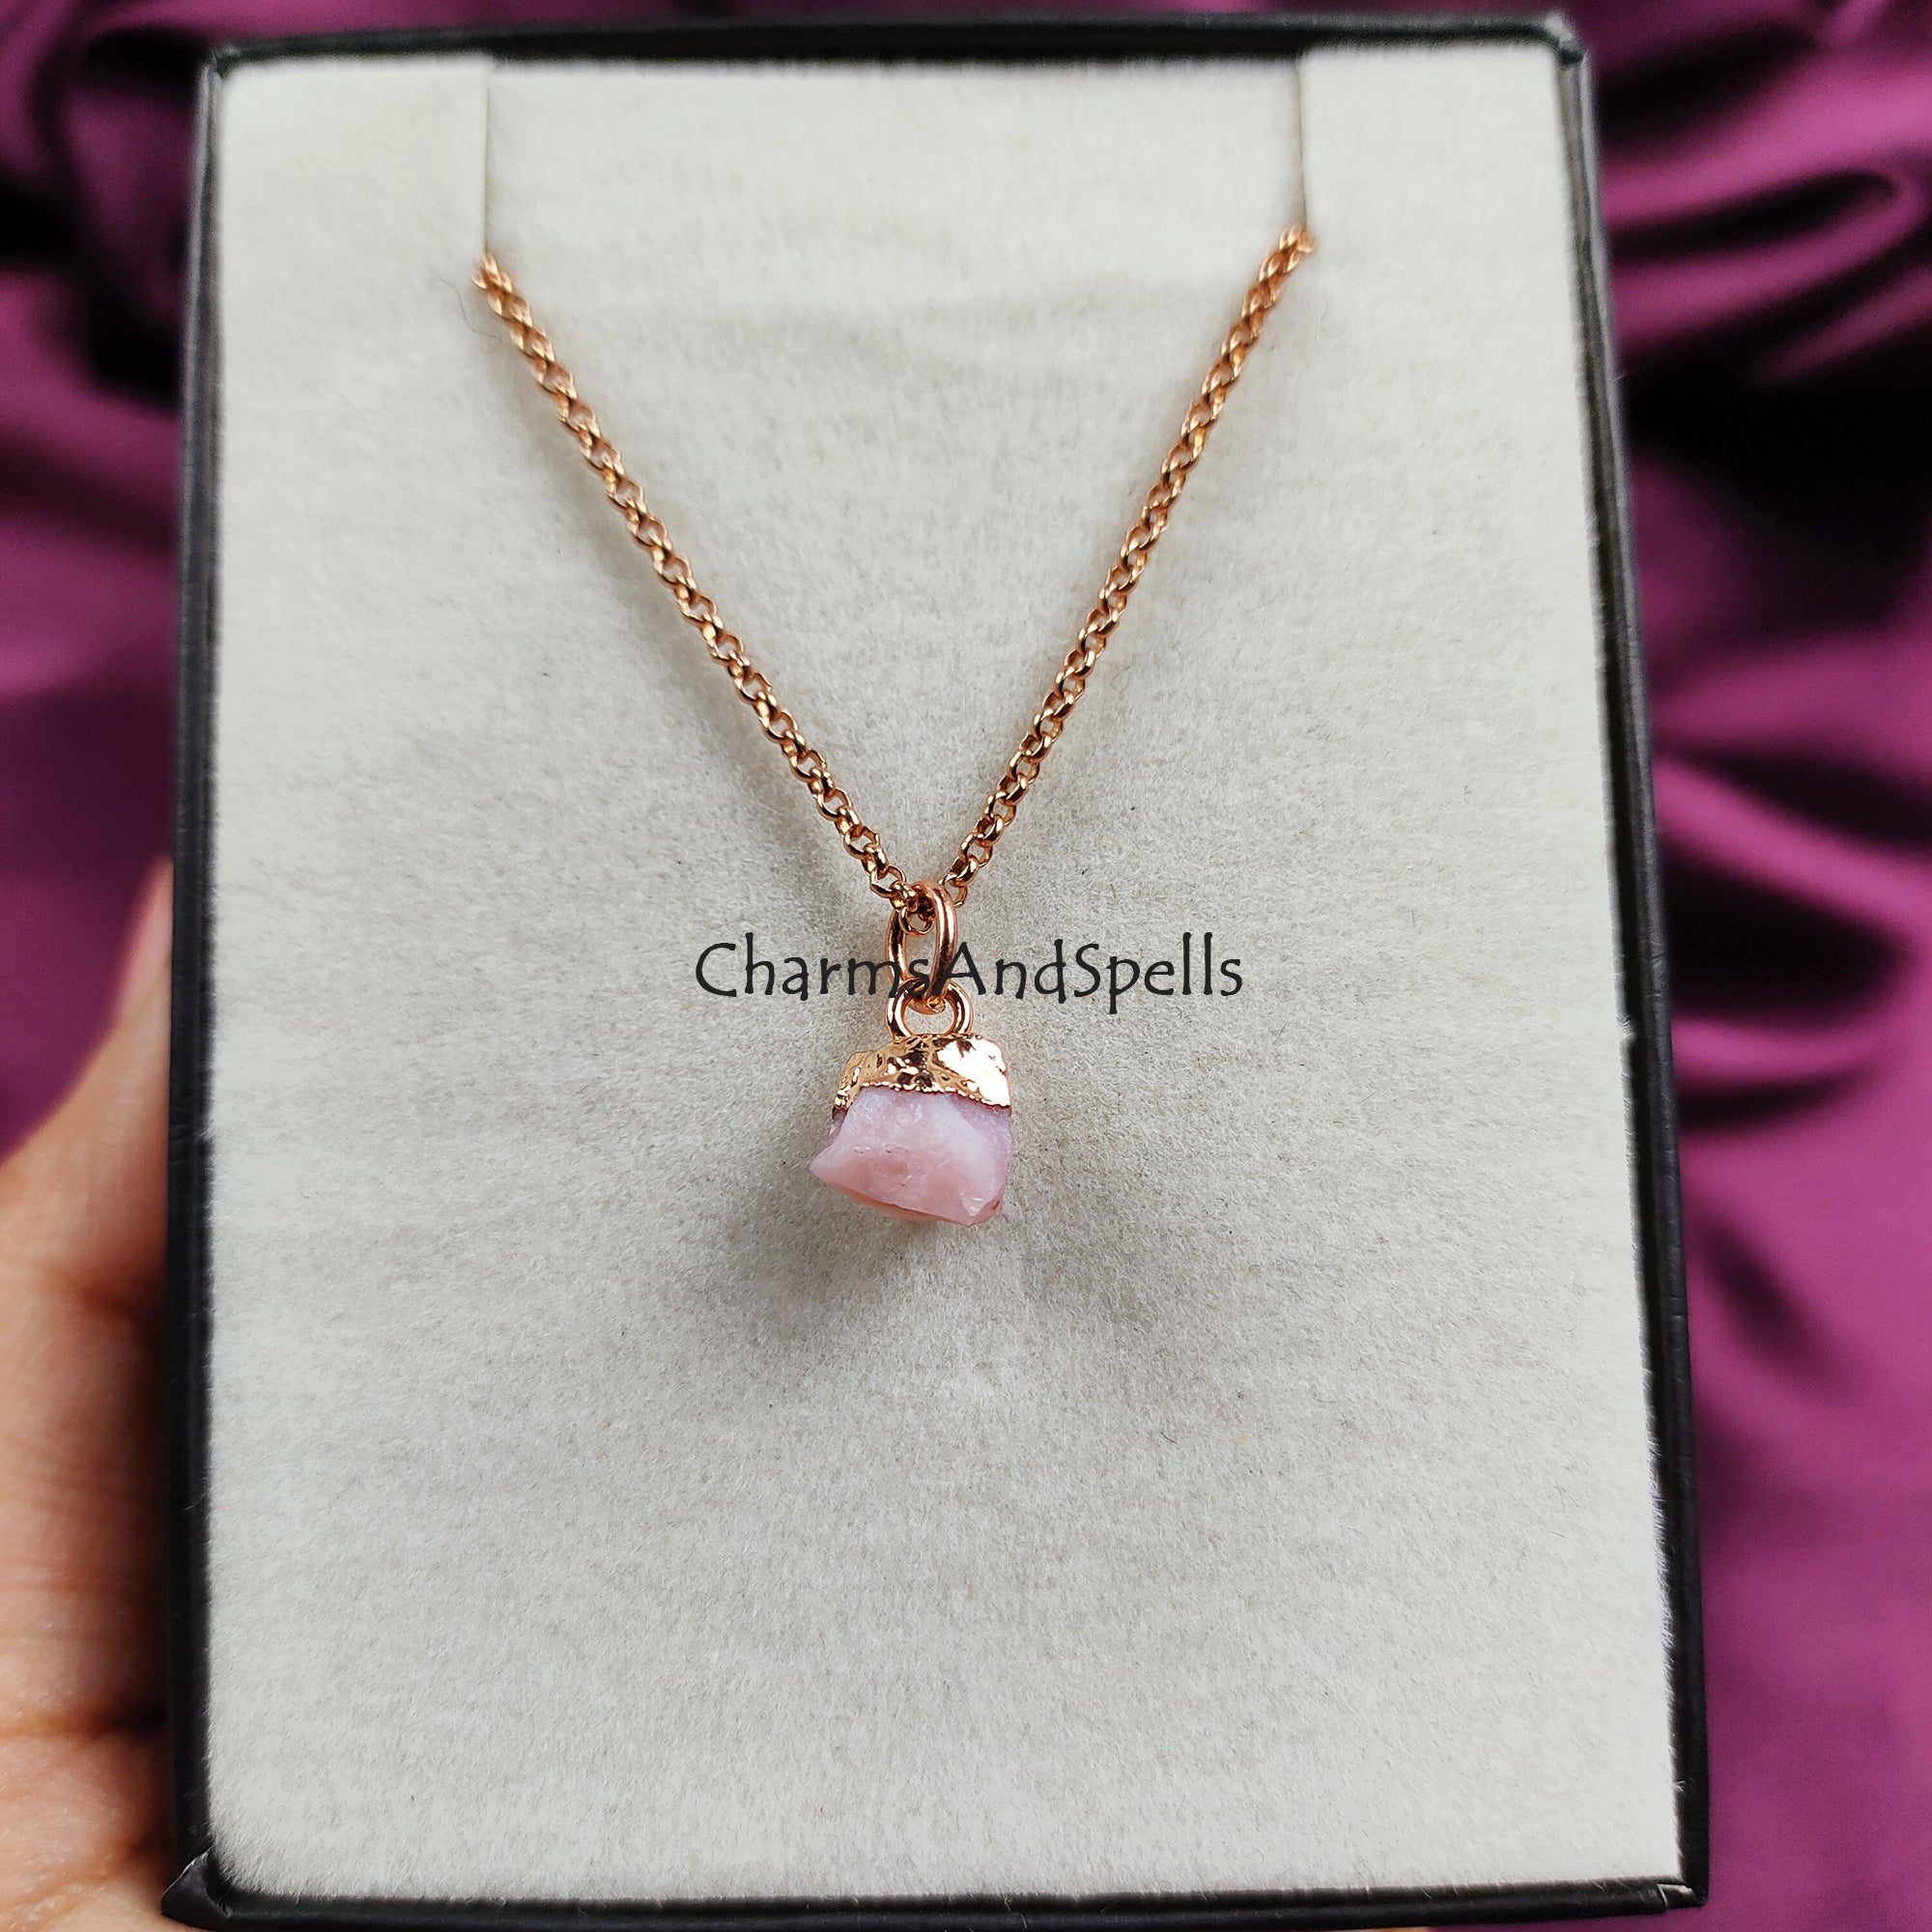 Raw Pink Opal Necklace, Birthstone Necklace, Gemstone Necklace, Crystal Healing Stones, October Birthstone, Birthday Gift, Bridesmaid Gift